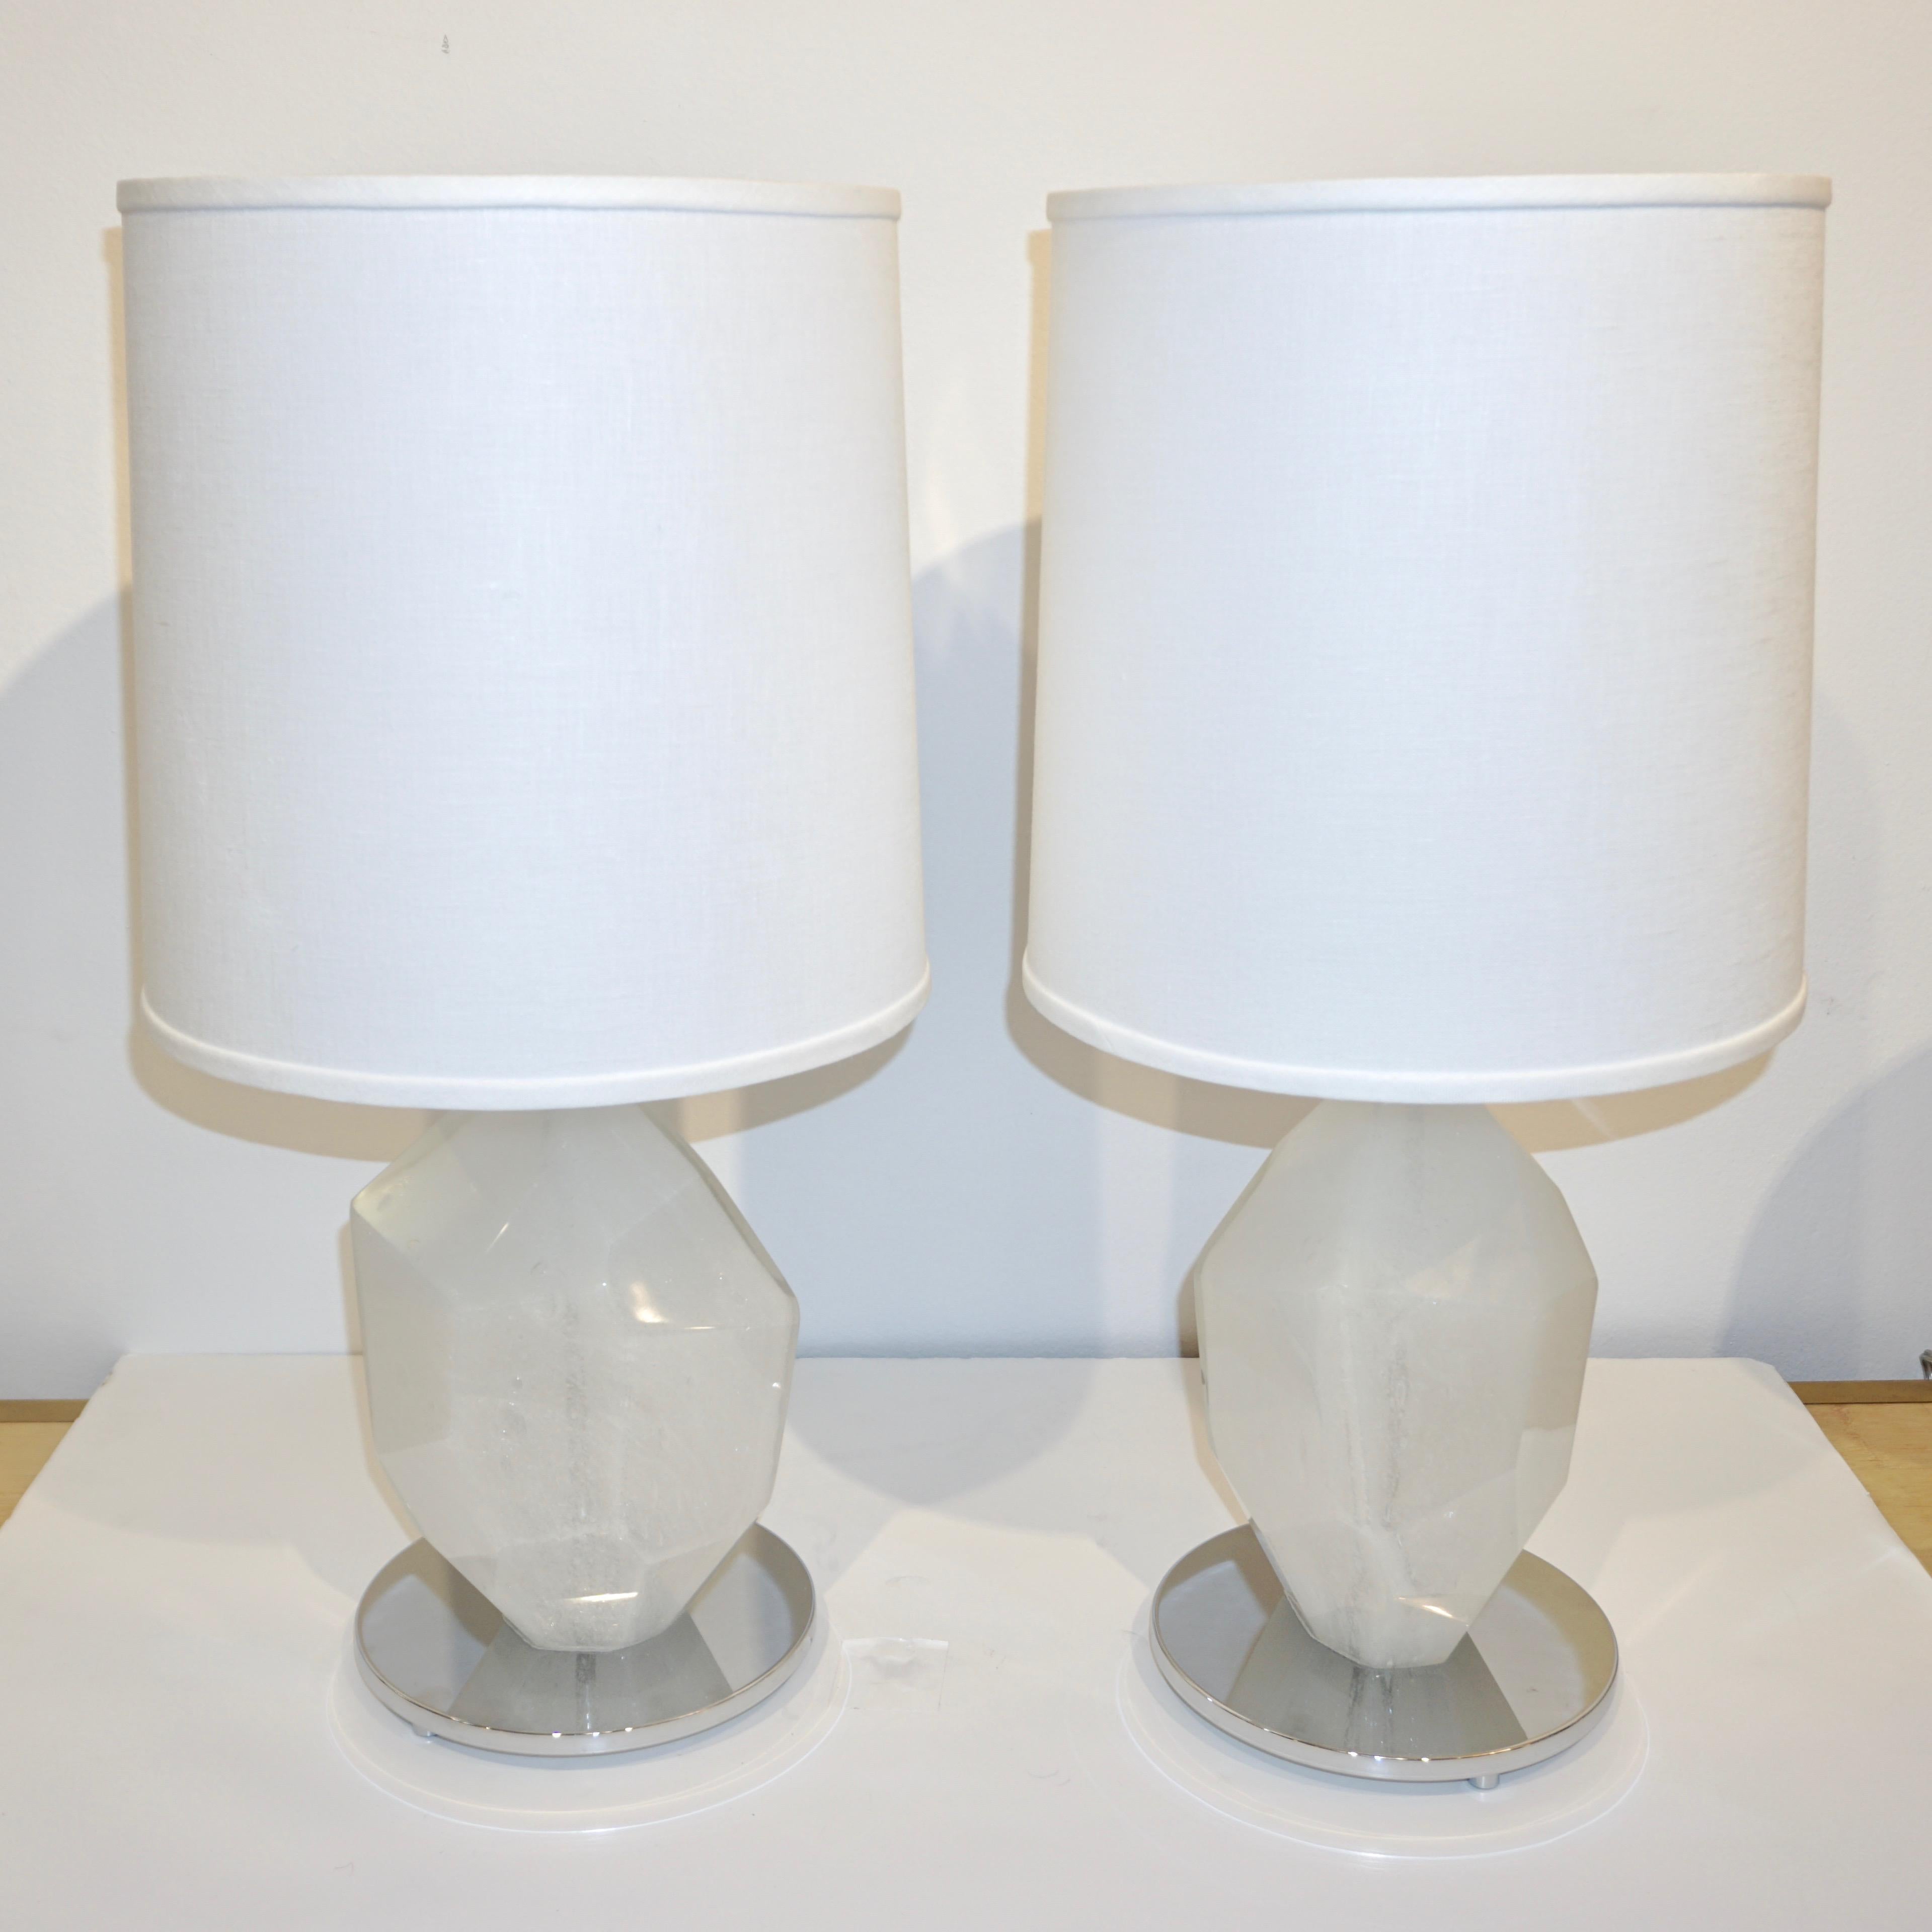 Organic Modern Donà Contemporary Italian Pair of Faceted Solid Rock White Murano Glass Lamps